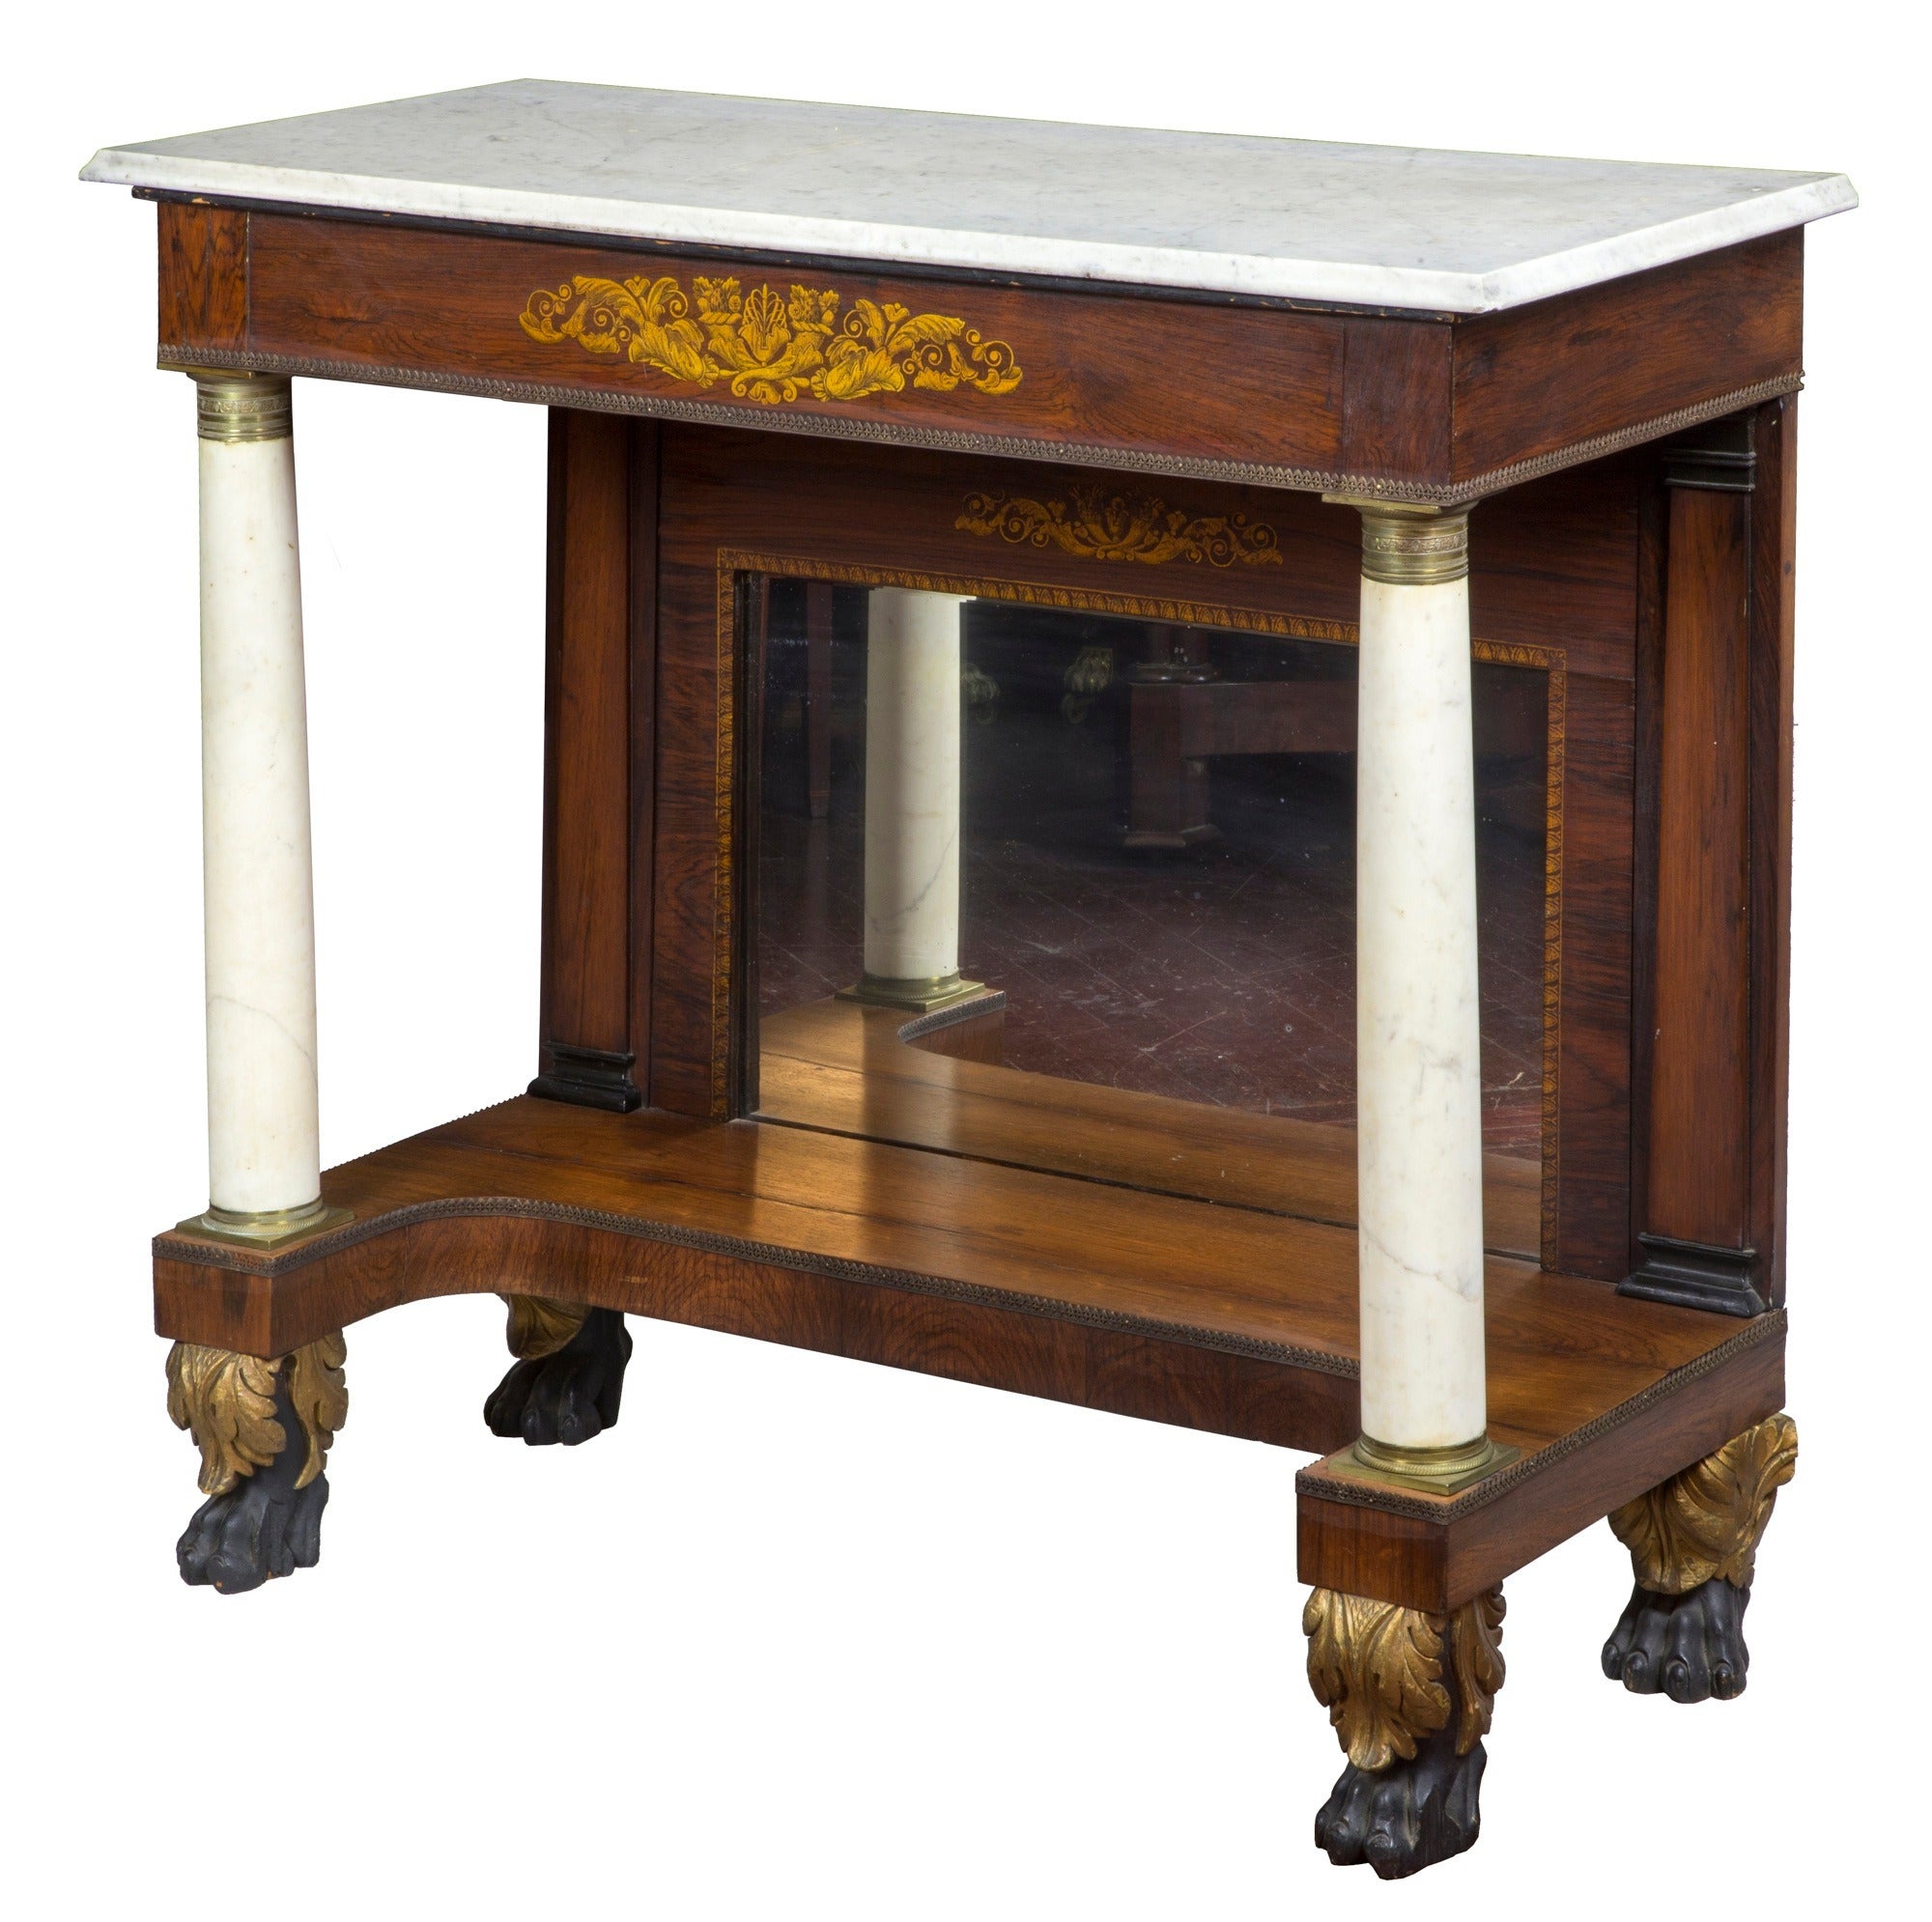 Rosewood Stenciled Pier Table with Marble Columns, New York, 1830